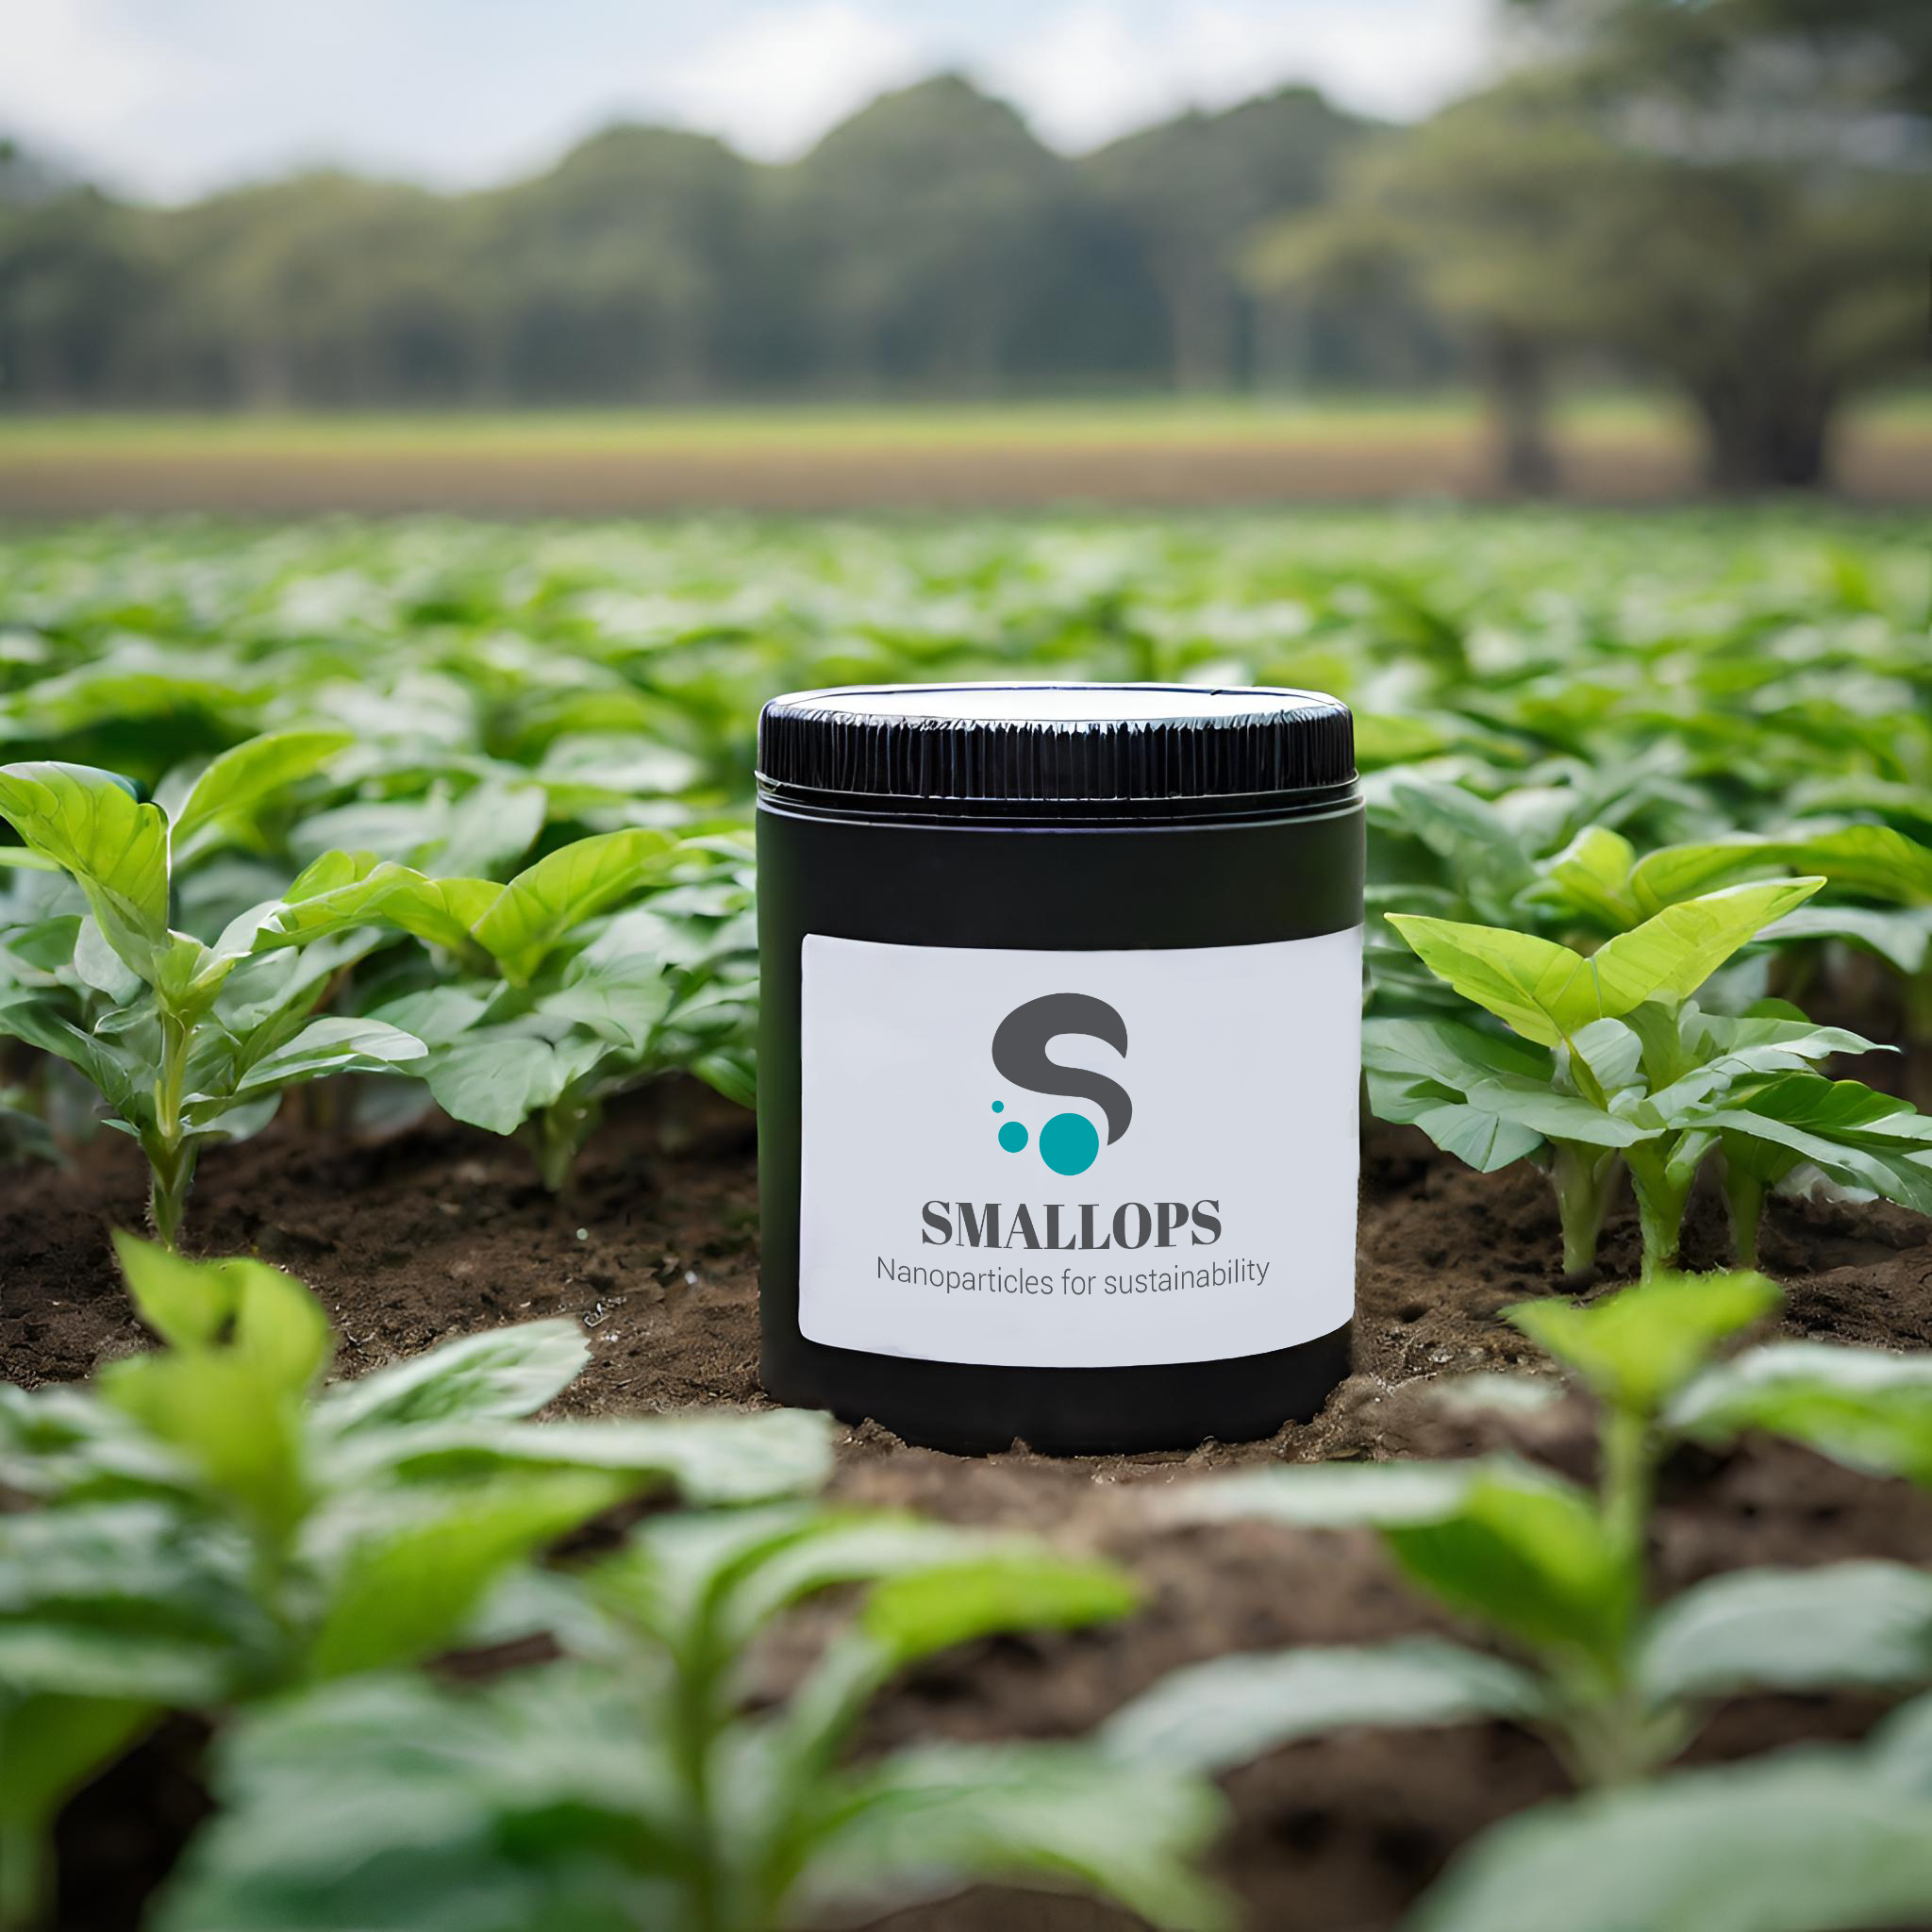 Fertigation Solutions: Maximize Irrigation and Fertilization Efficiency with Smallops Products